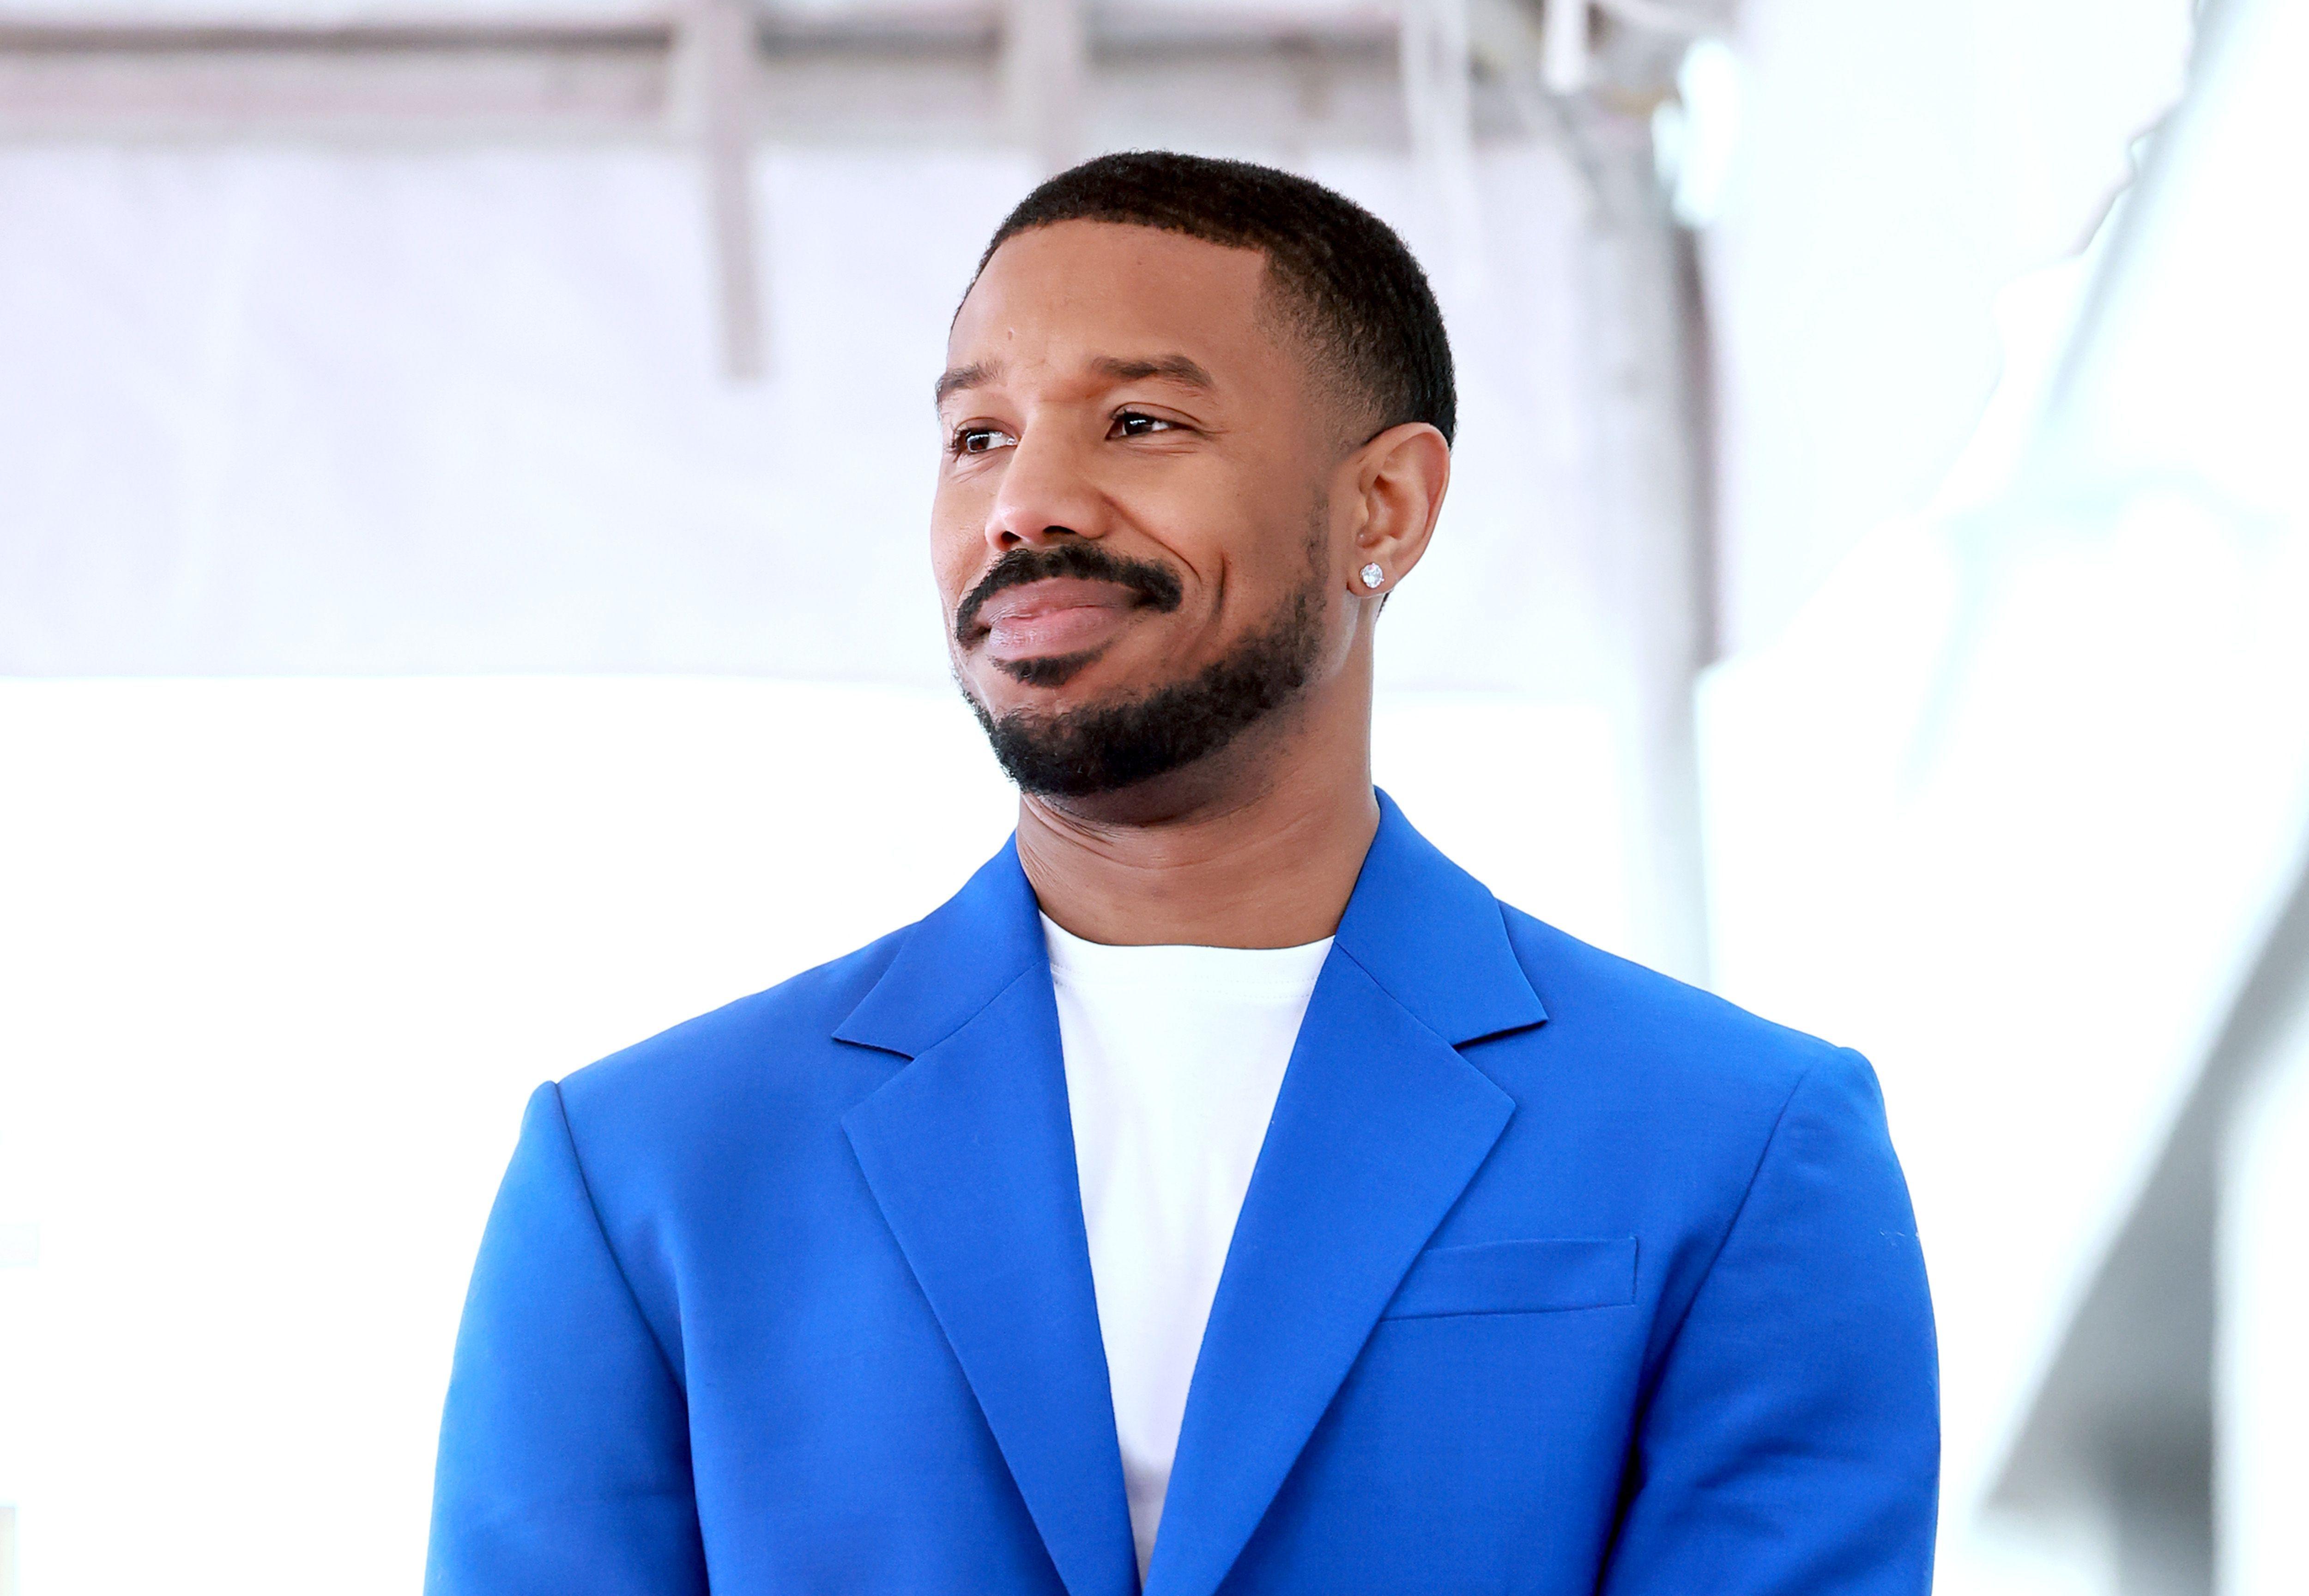 Michael B. Jordan Unveiled His Star On The Hollywood Walk Of Fame